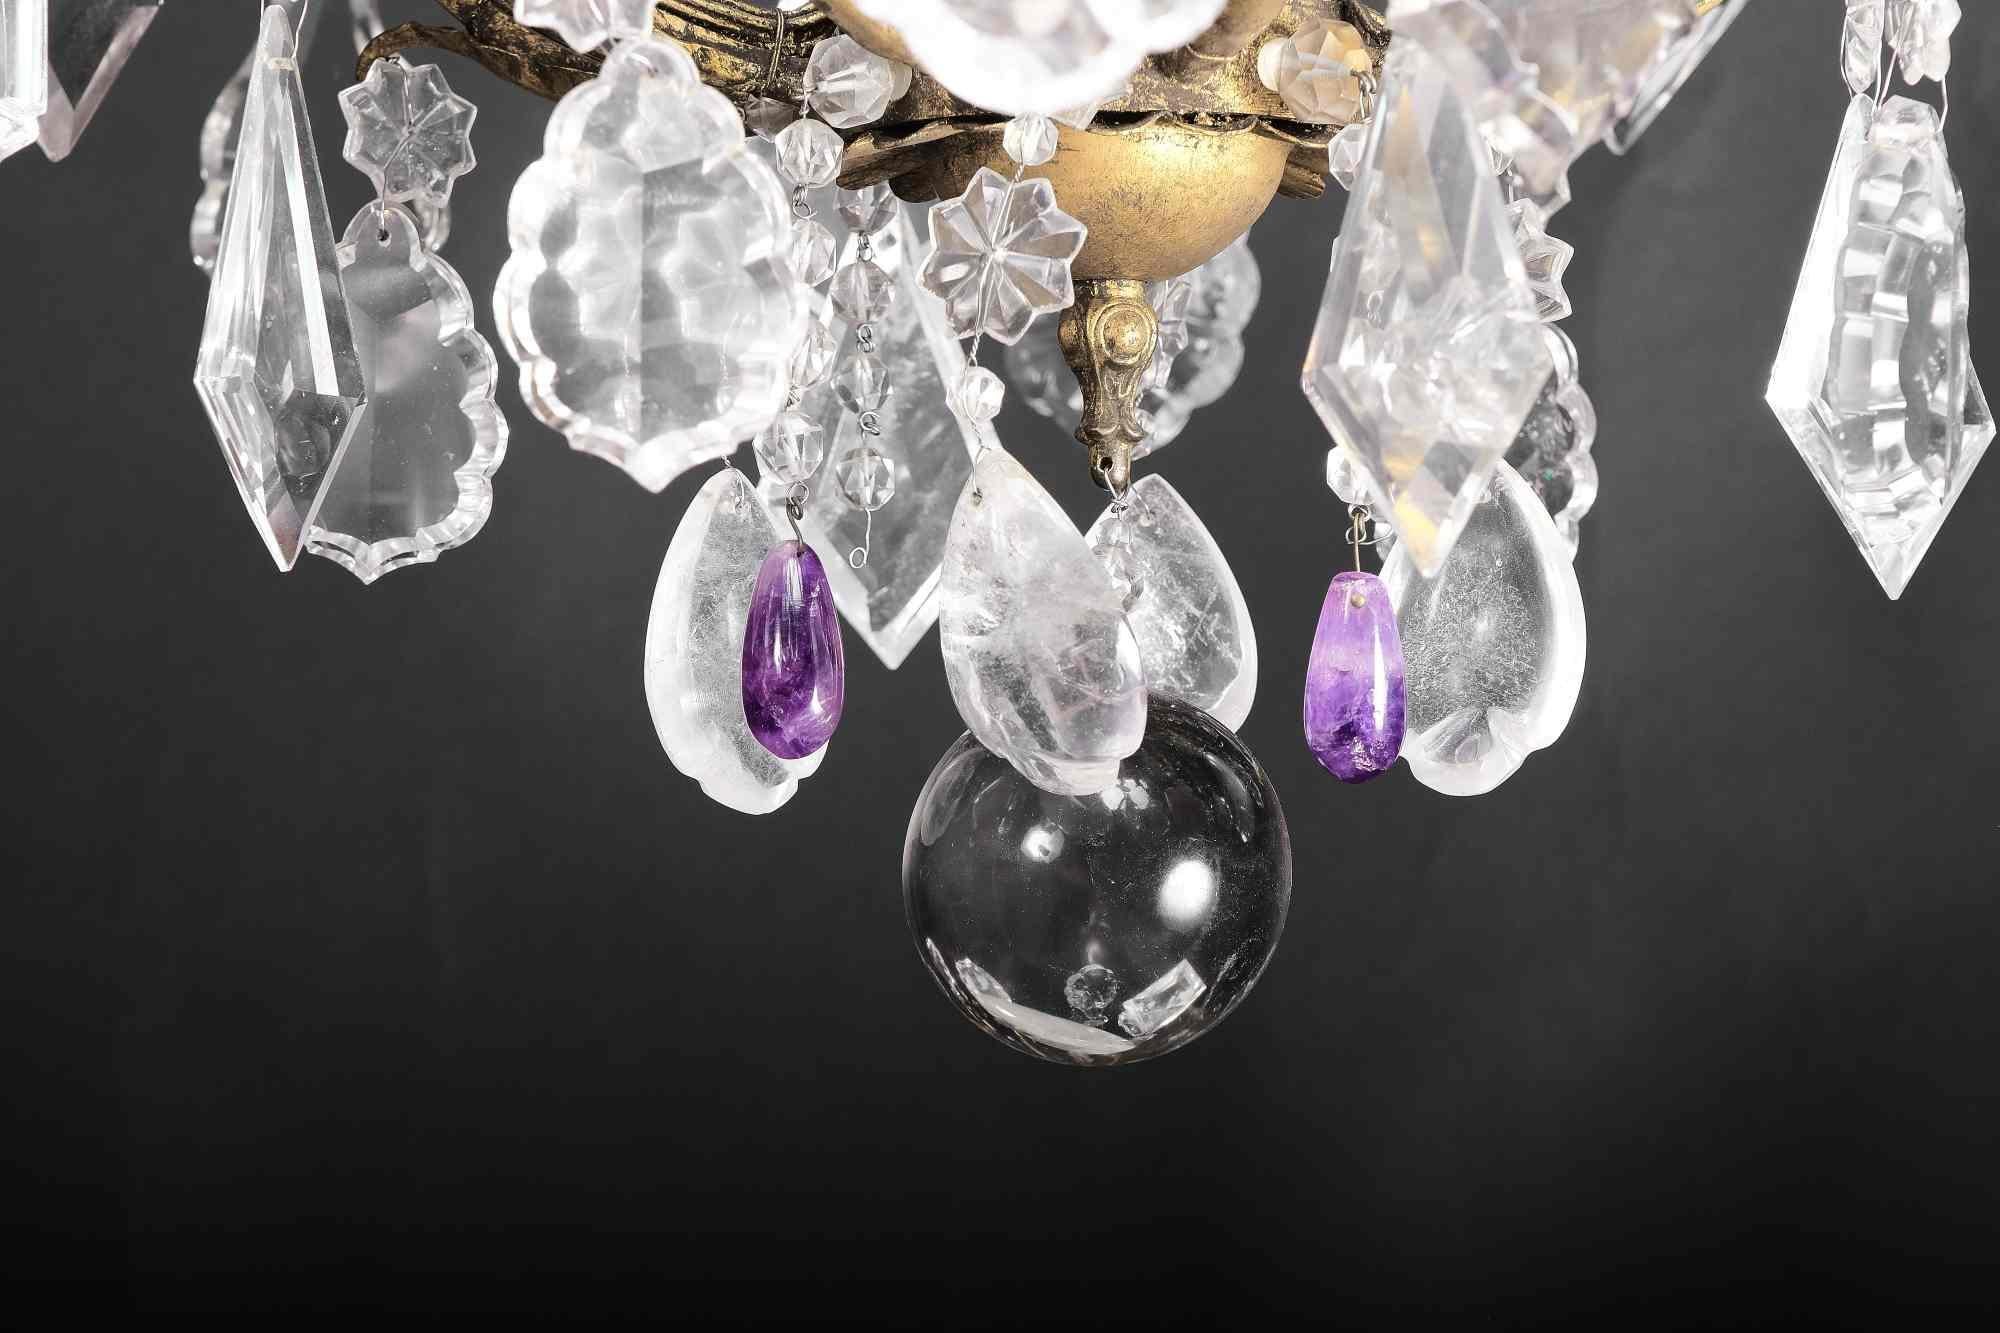 Very finely worked, patinated and gilded iron chandelier, with twelve lights. Magnificent wall hanging in rock crystal and amethyst of excellent quality. The large central sphere at the bottom and many large crystals are of an almost transparent